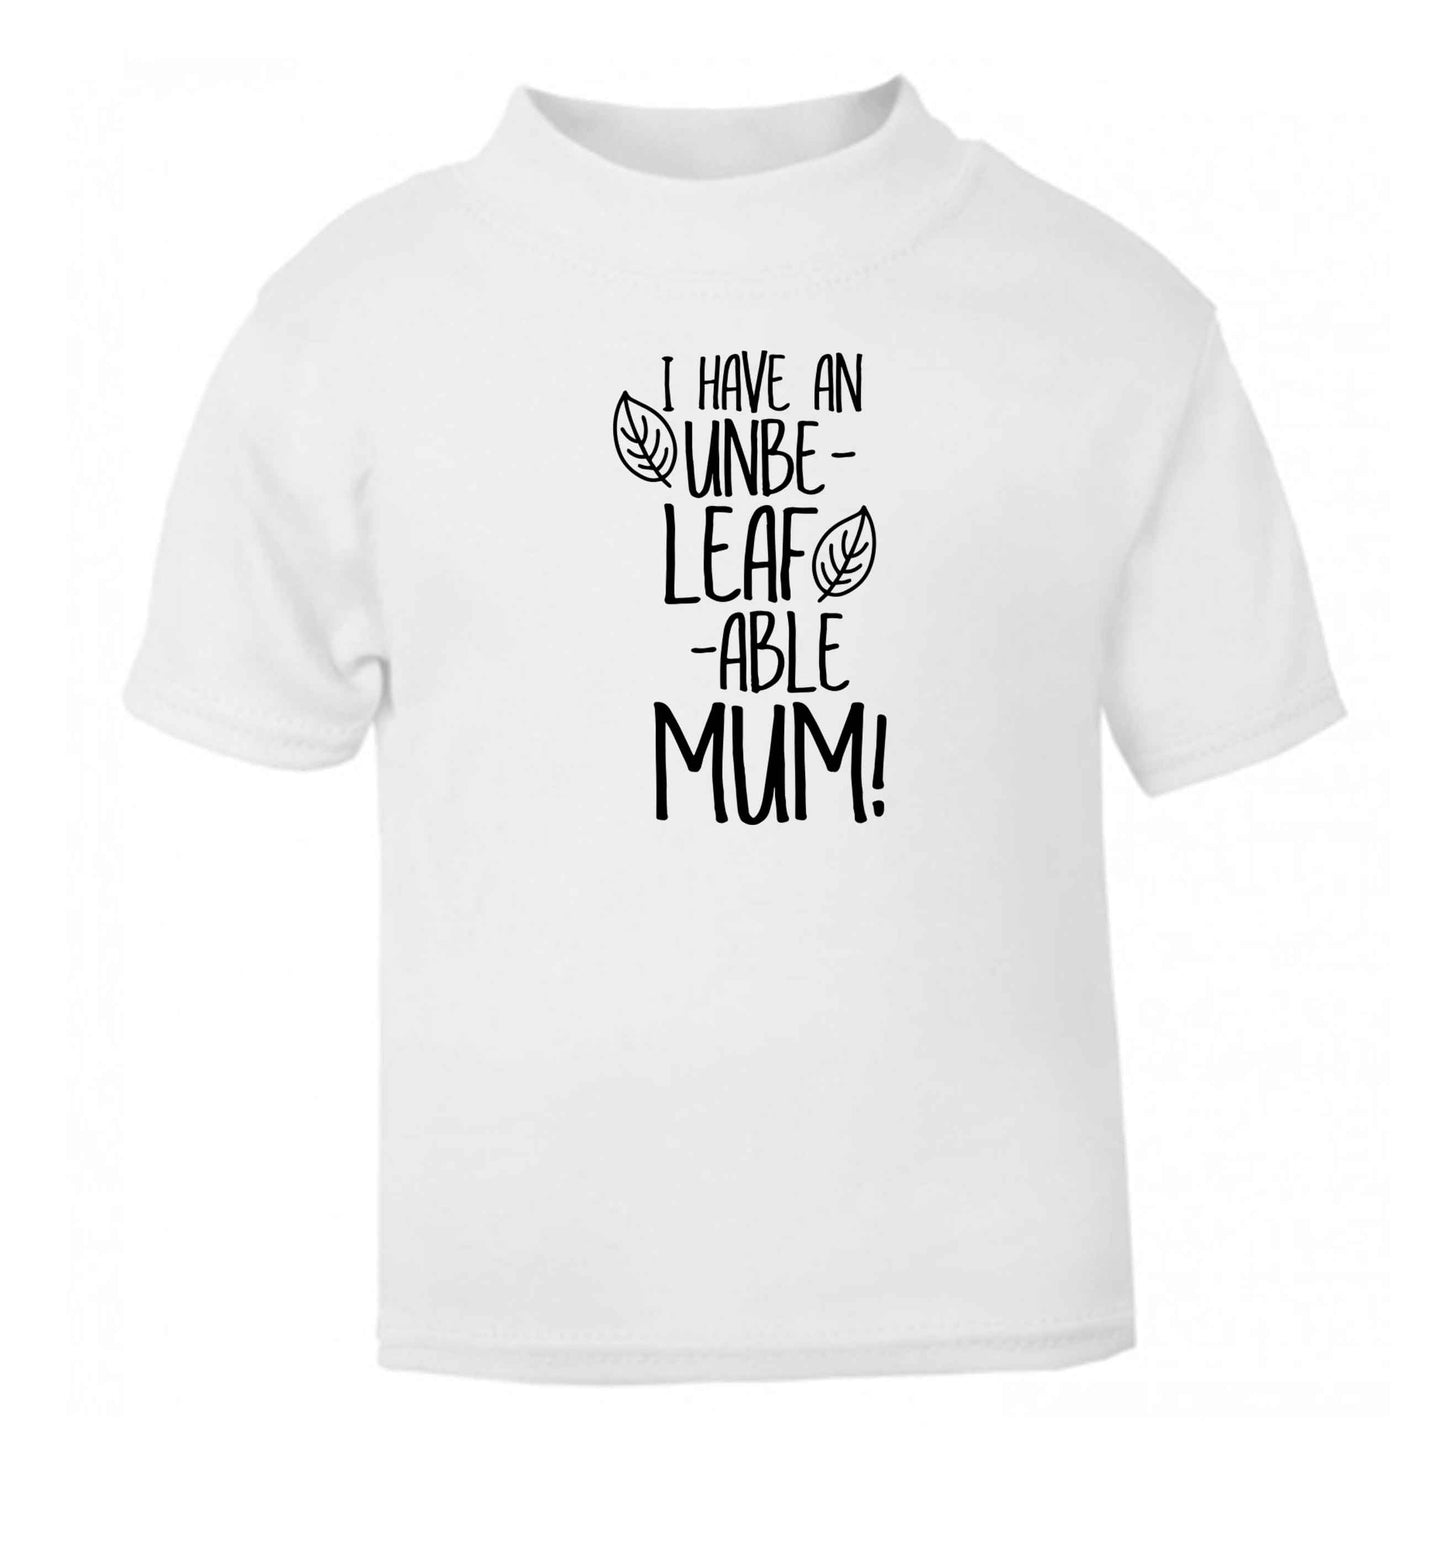 I have an unbeleafable mum! white baby toddler Tshirt 2 Years